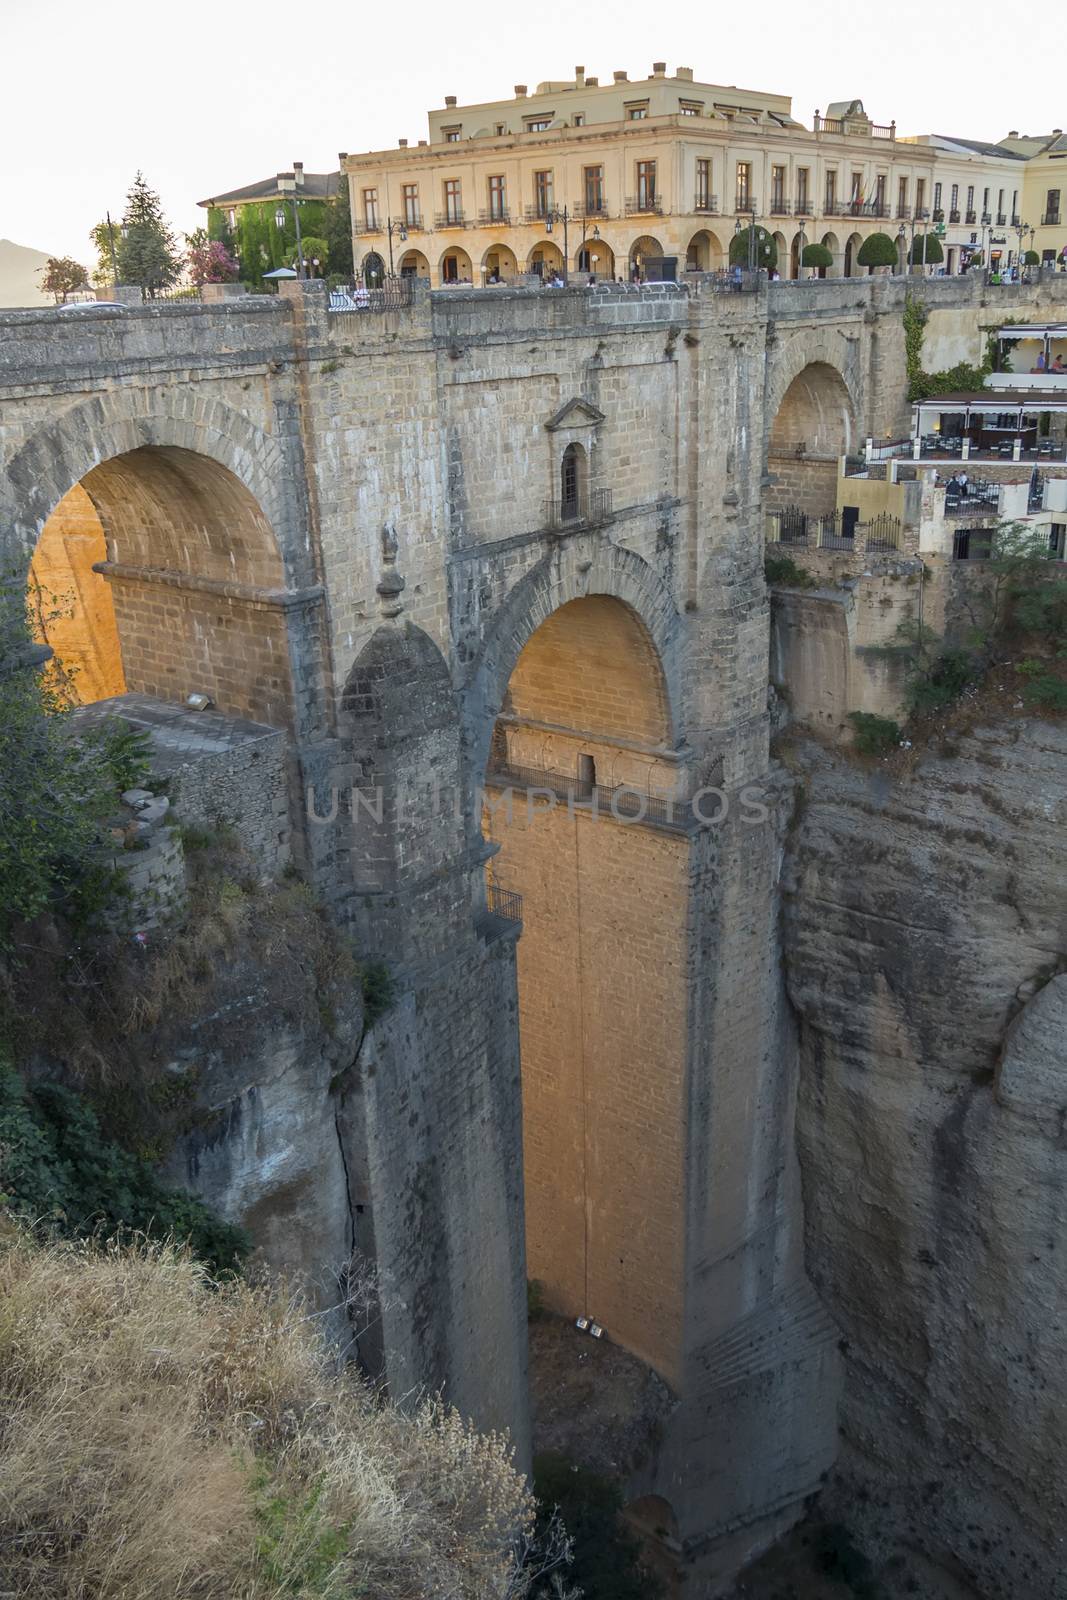 View of Ronda old stone bridge (other side), Malaga, Spain by max8xam